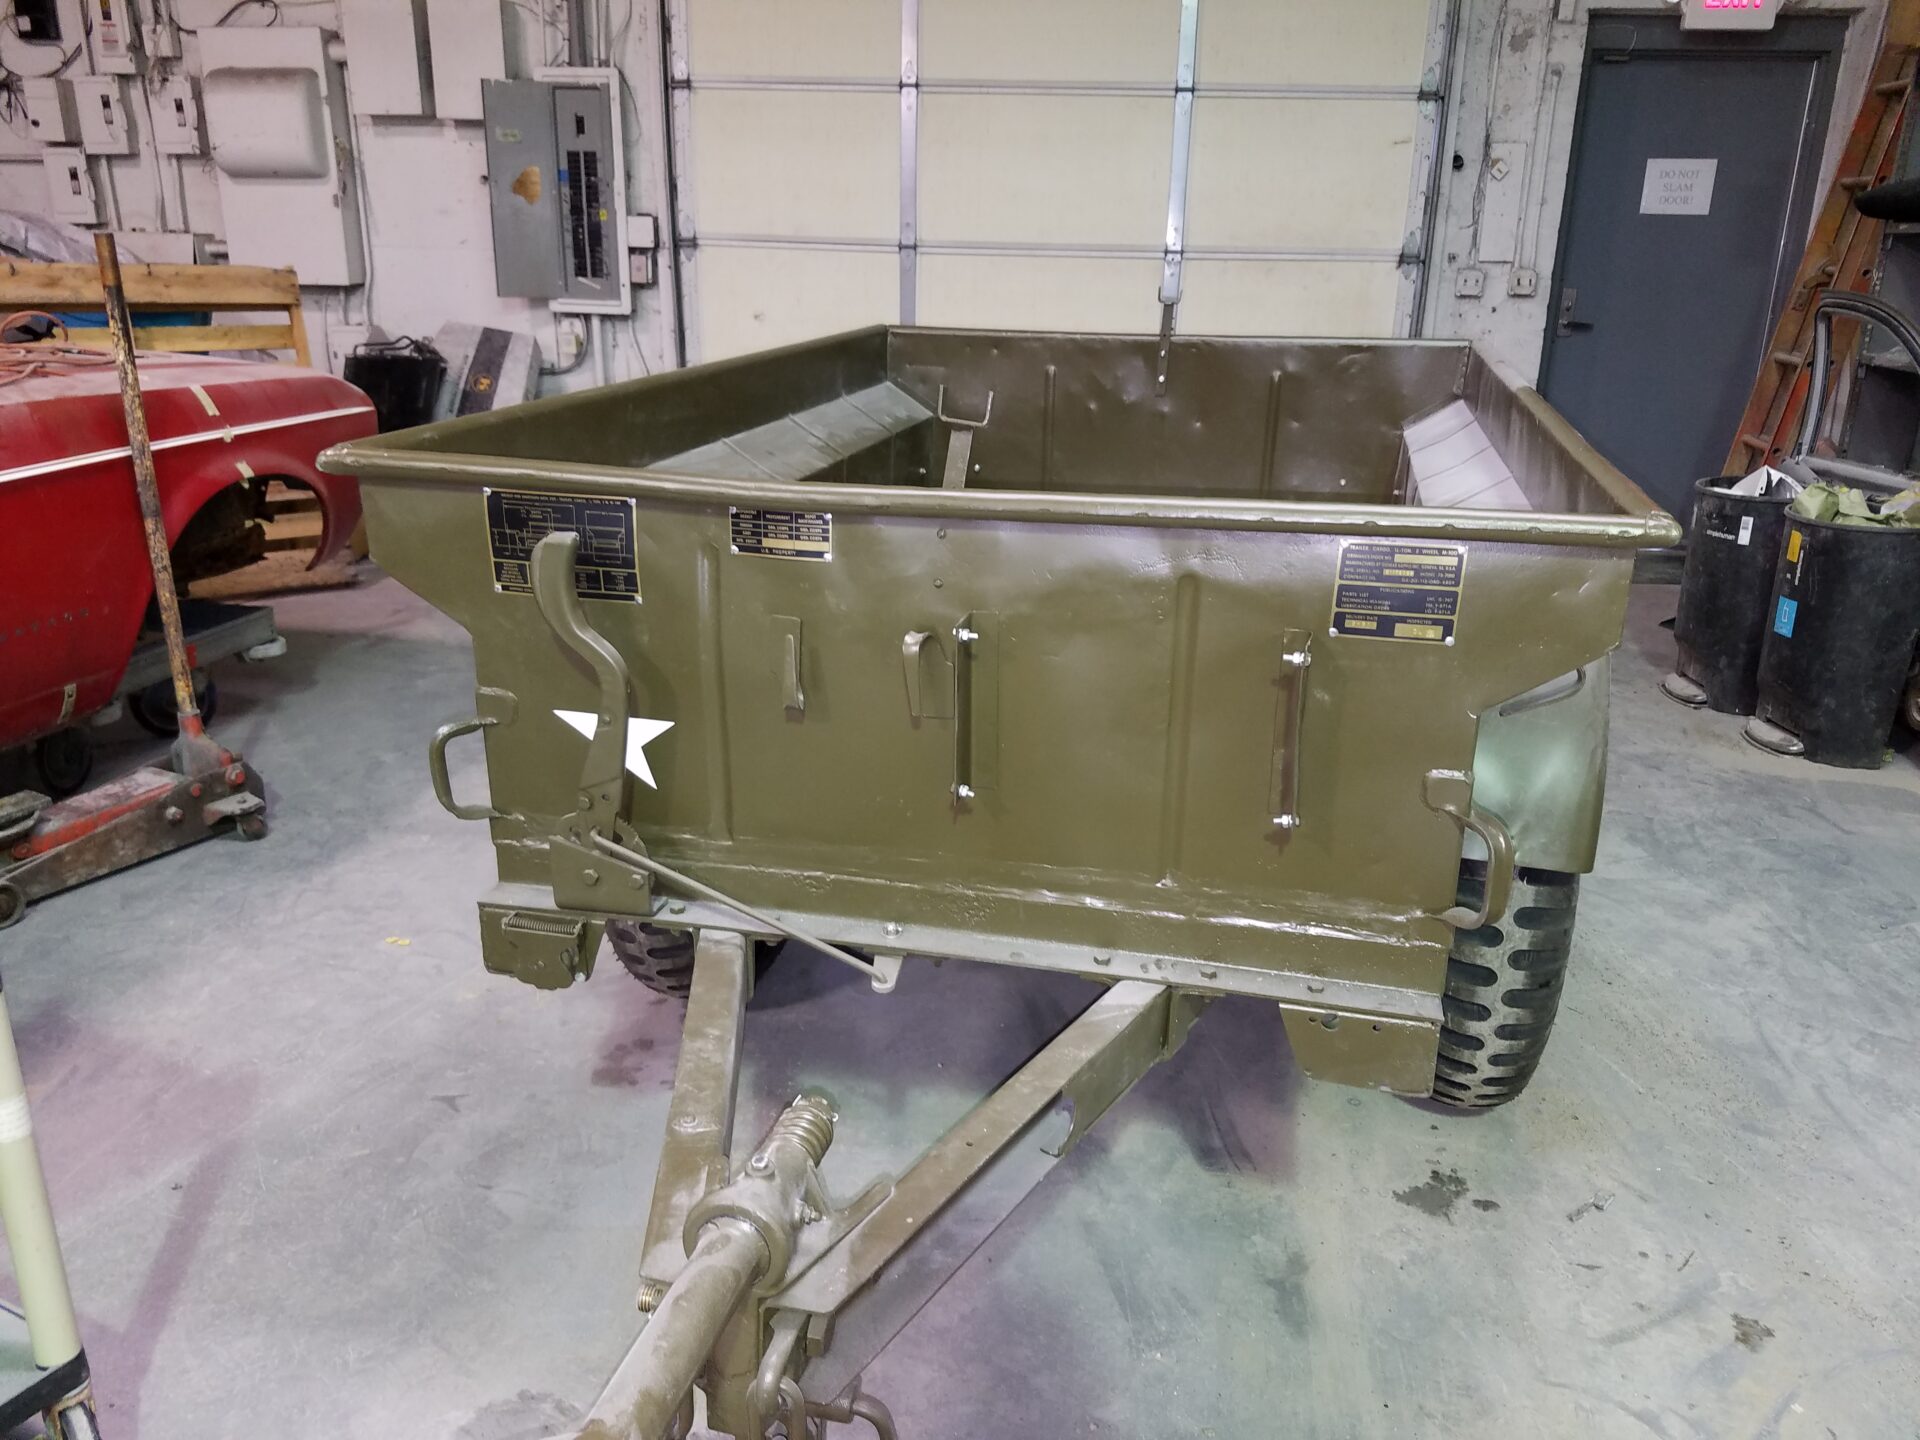 A newly painted jeep trailer